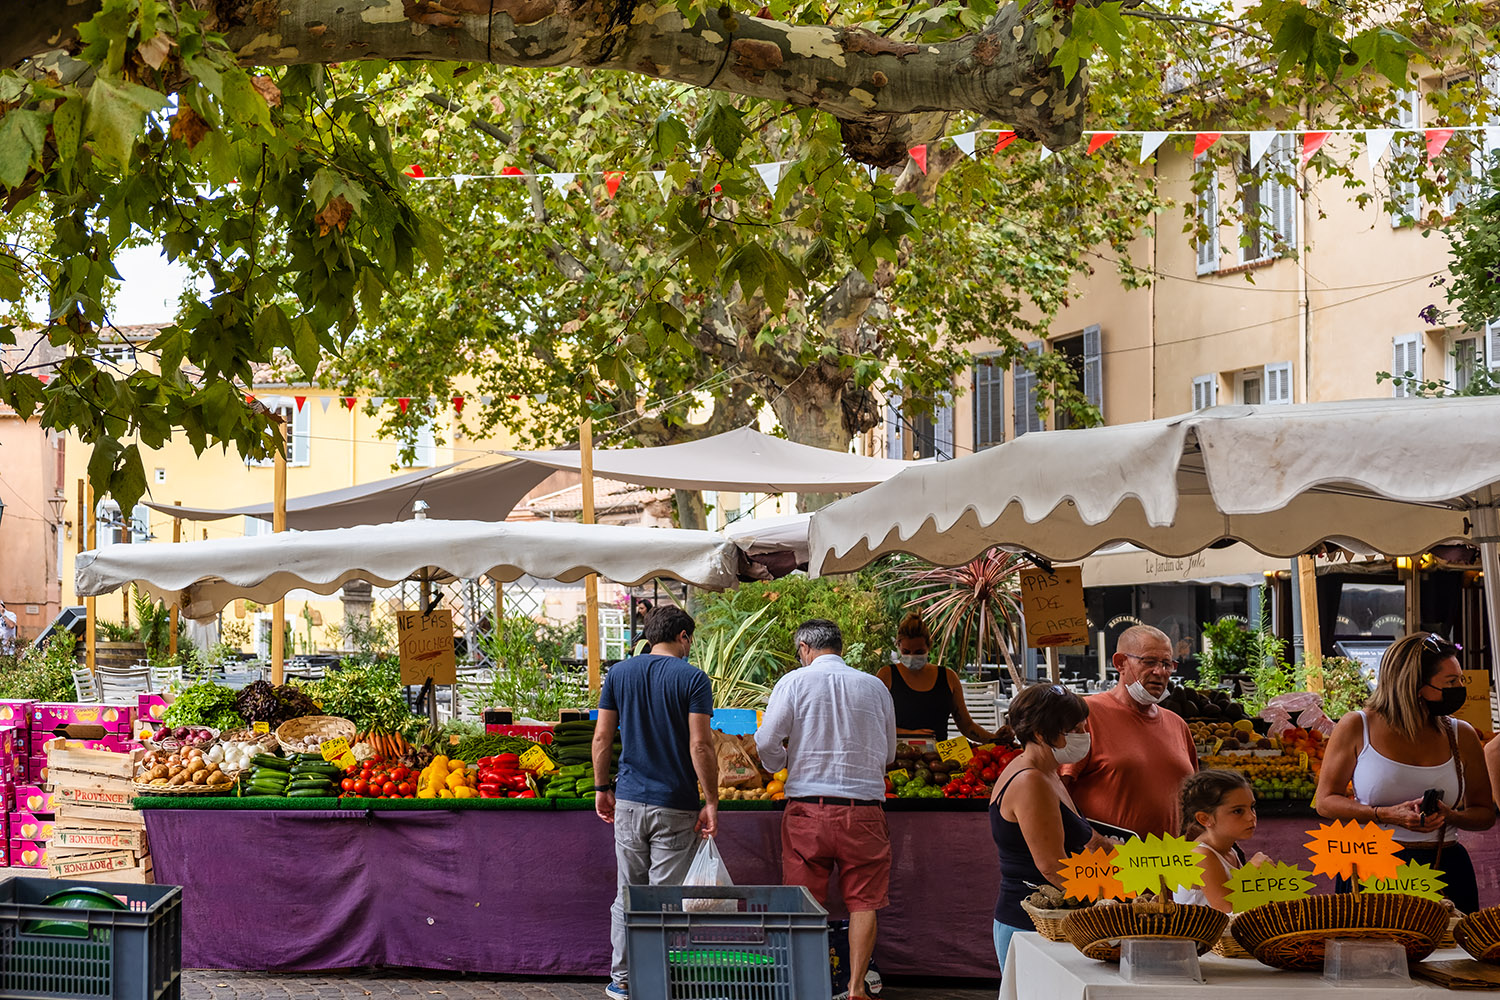 The market on the 'place Paul Albert Février' next to the cathedral